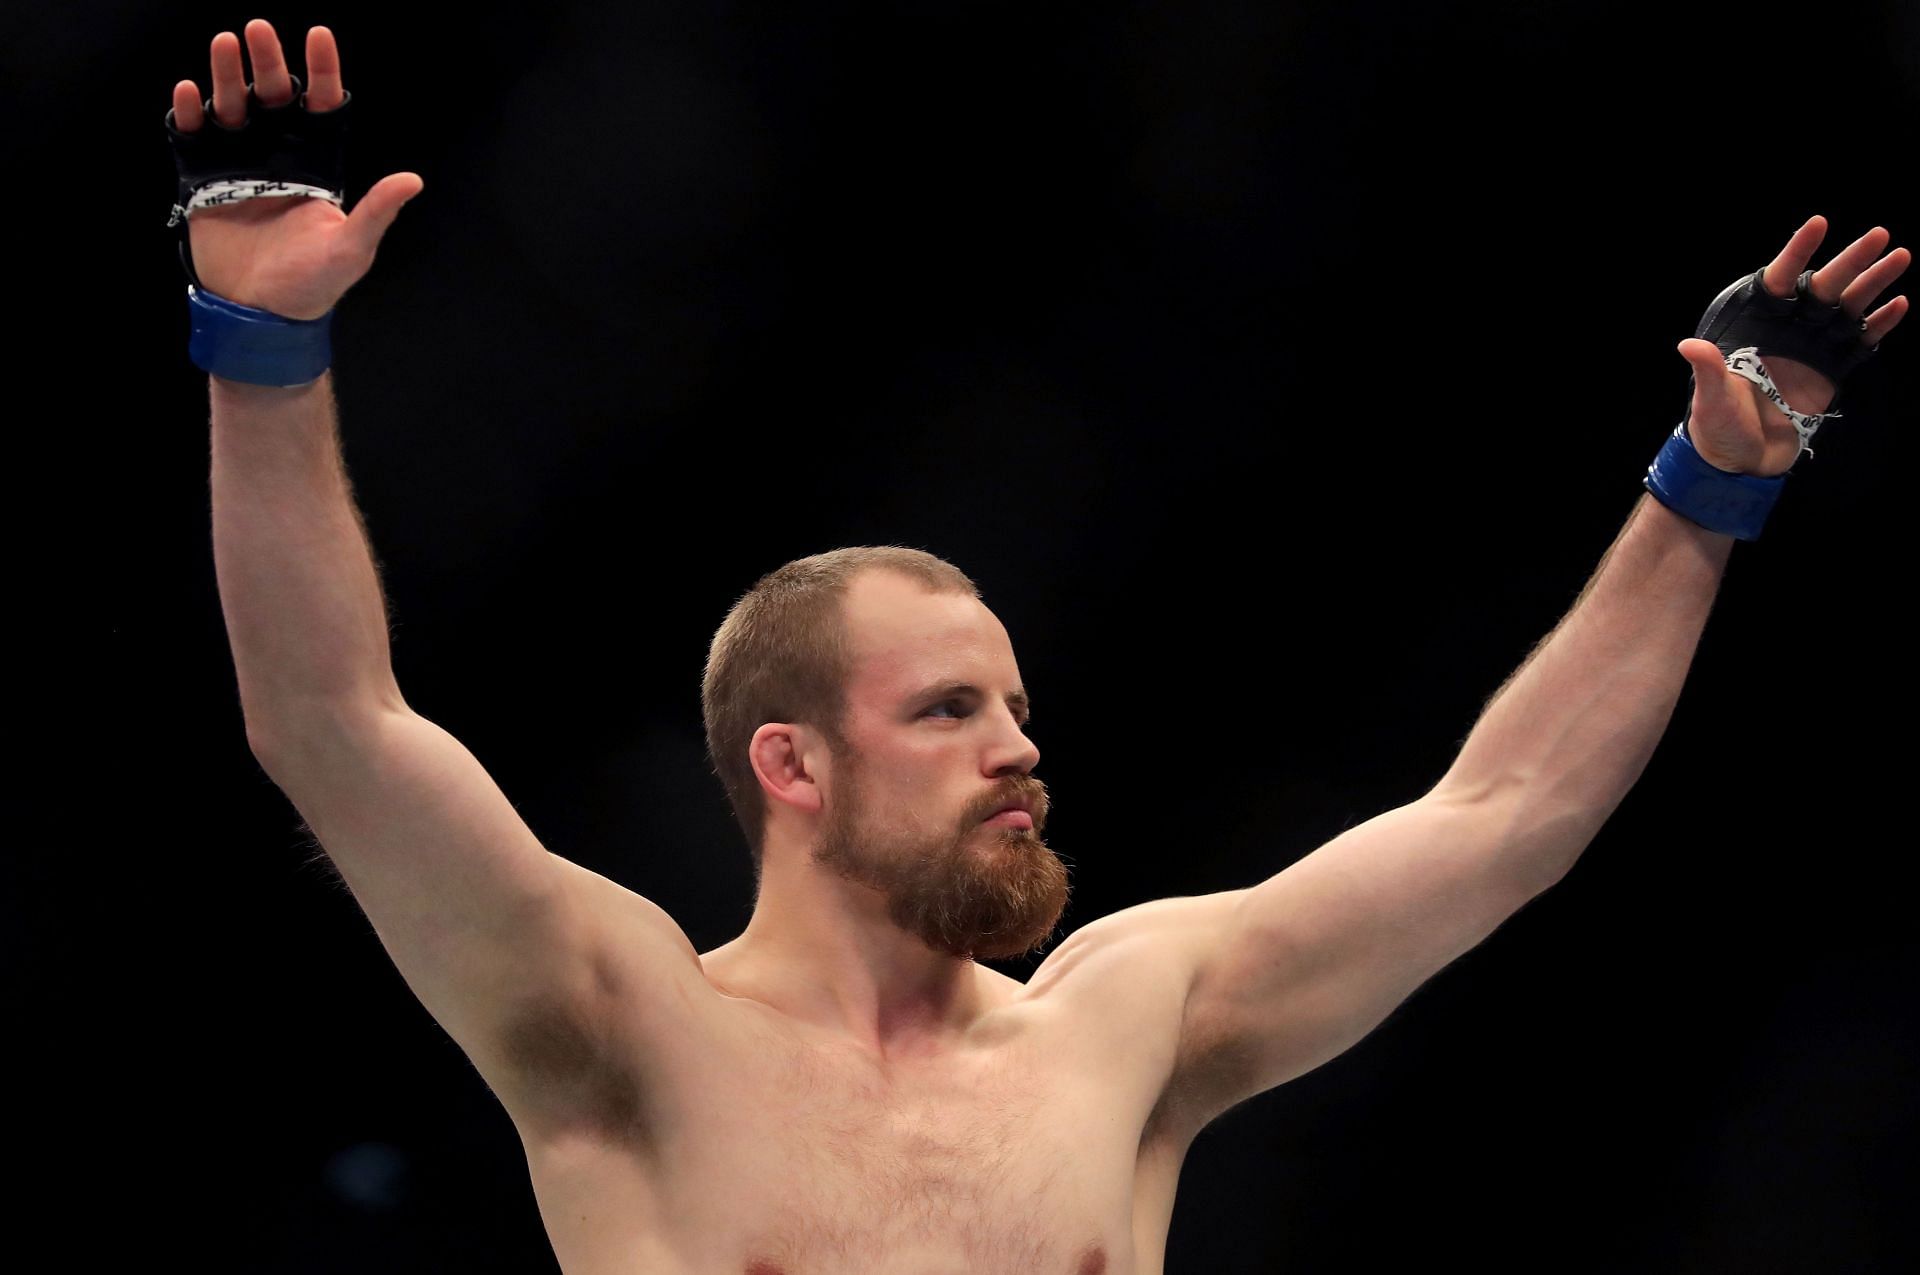 Welterweight grappling star Gunnar Nelson returns to action this weekend for the first time since 2019